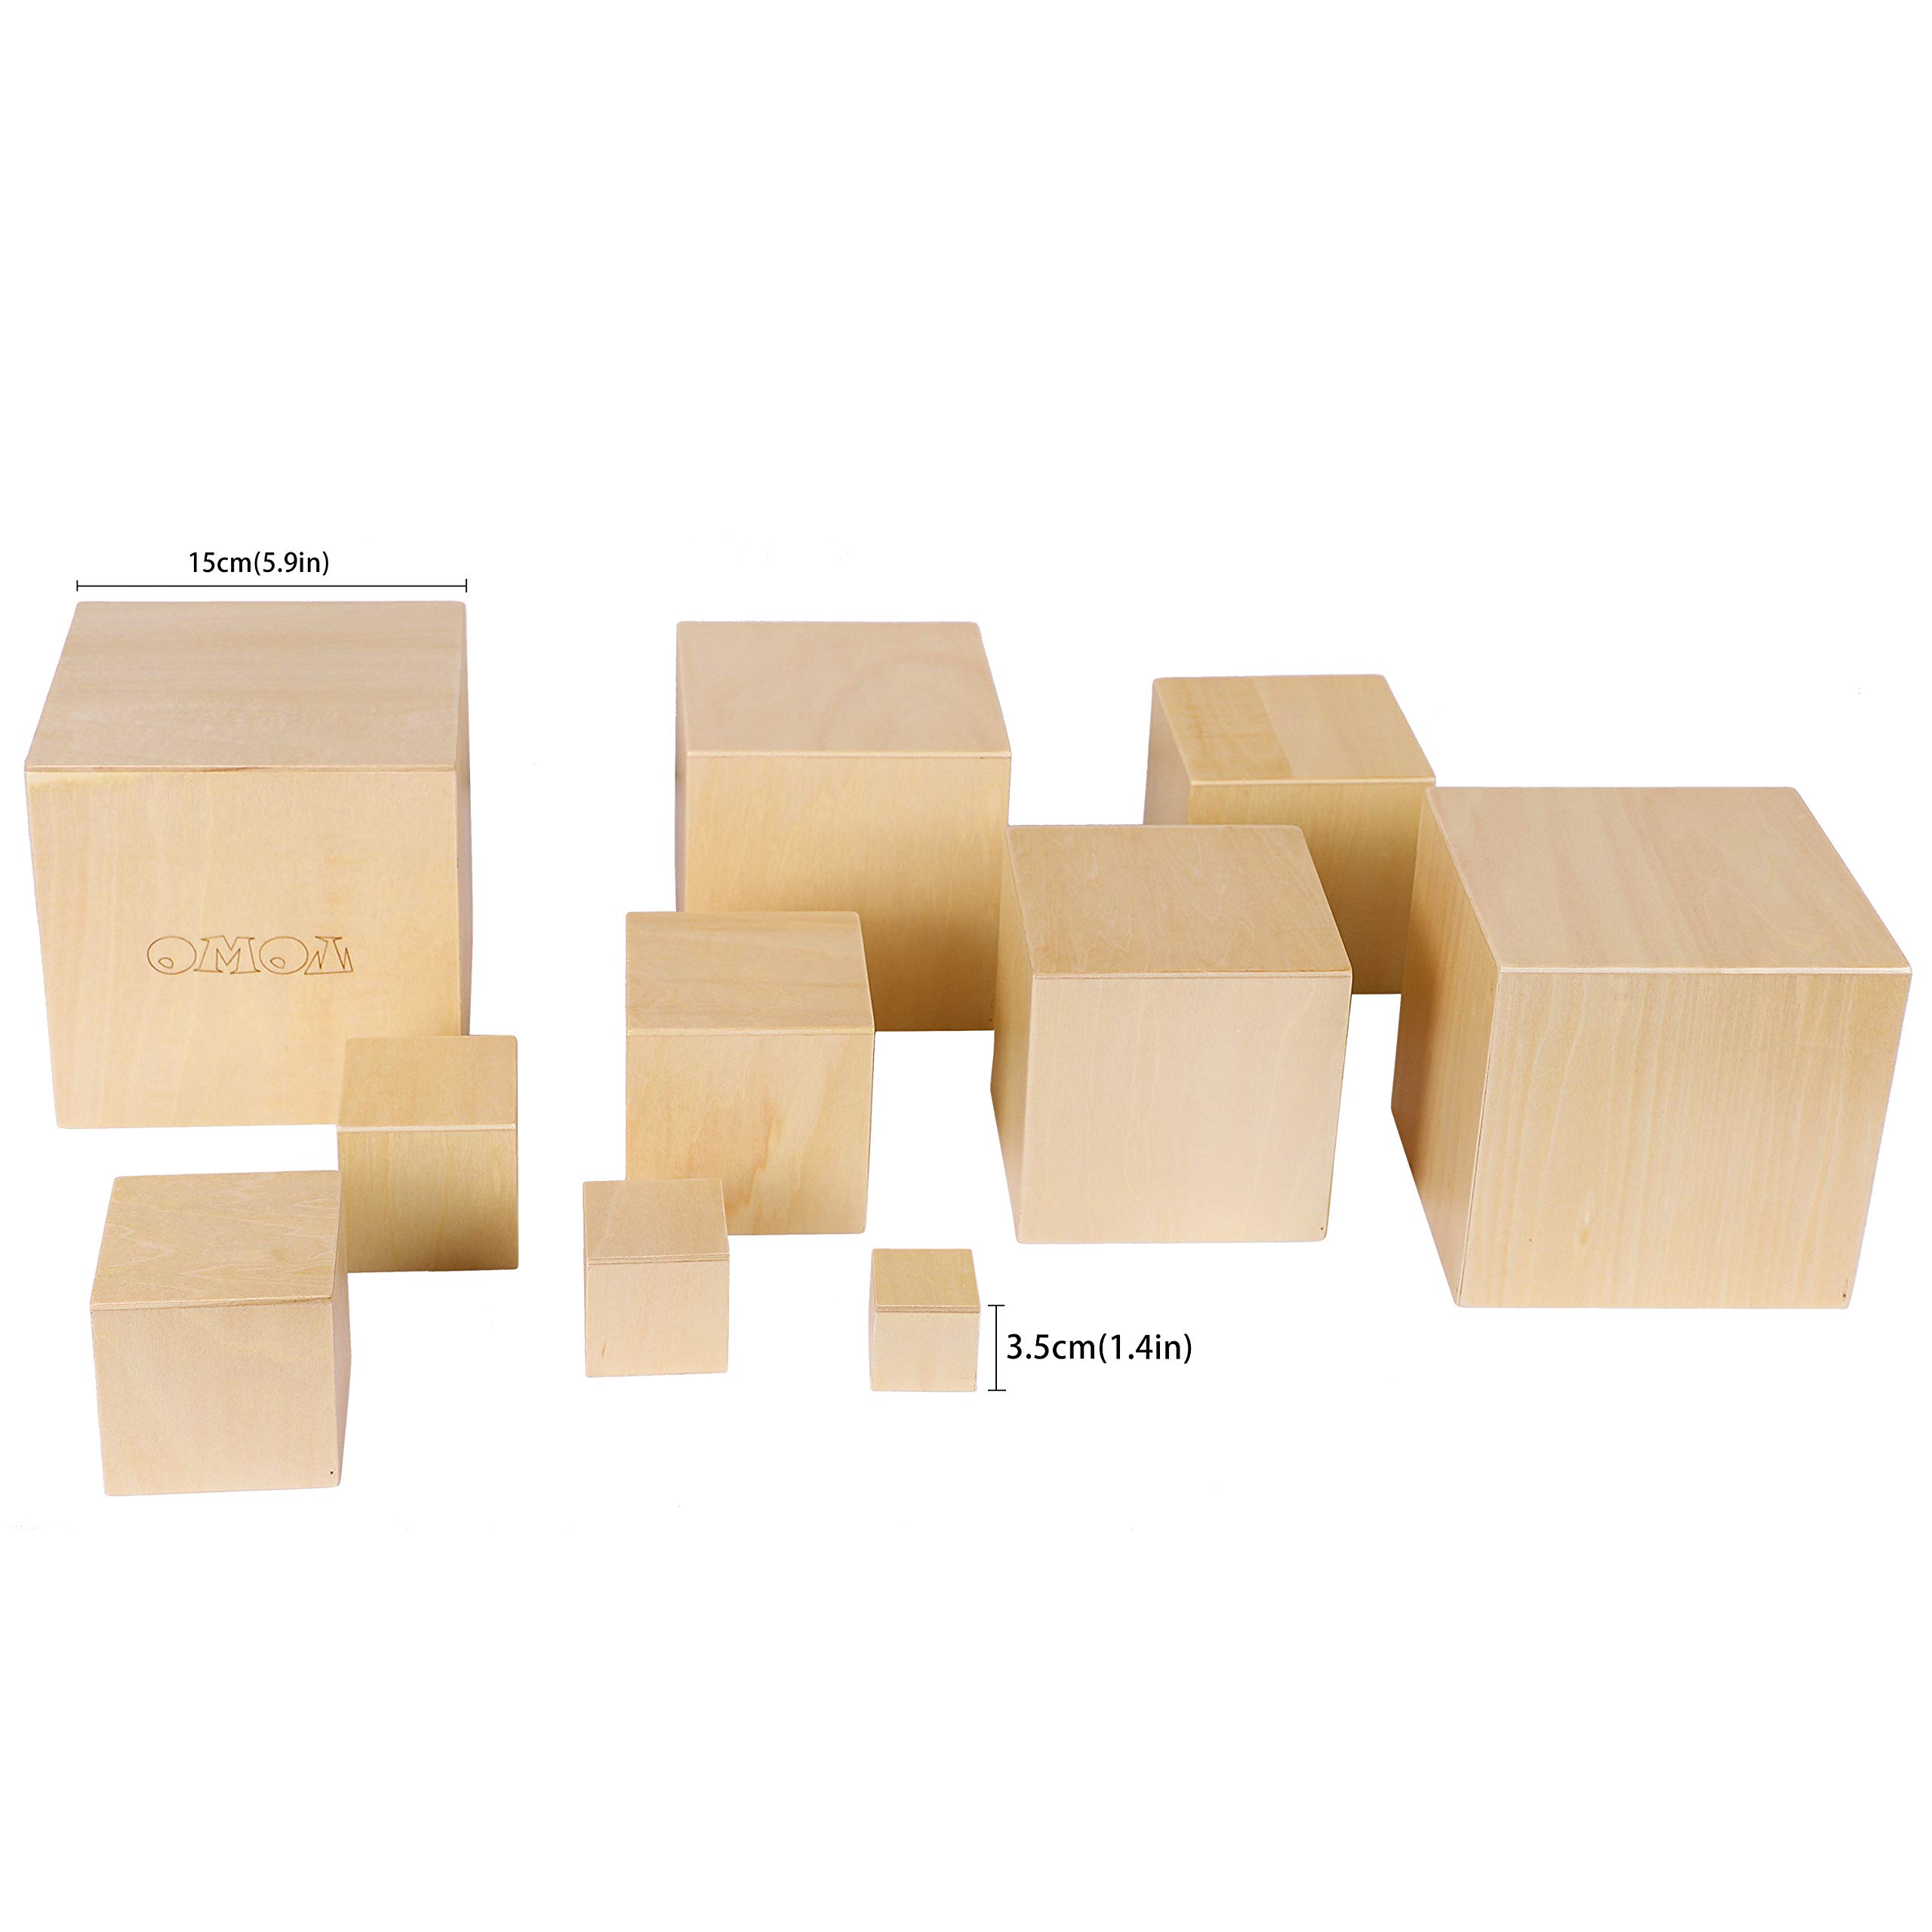 TOWO Wooden Stacking Boxes-Nesting and Sorting Cups Blocks for Toddlers-Stacking Cubes Educational Learning Toys for 2 Years Old Montessori Materials